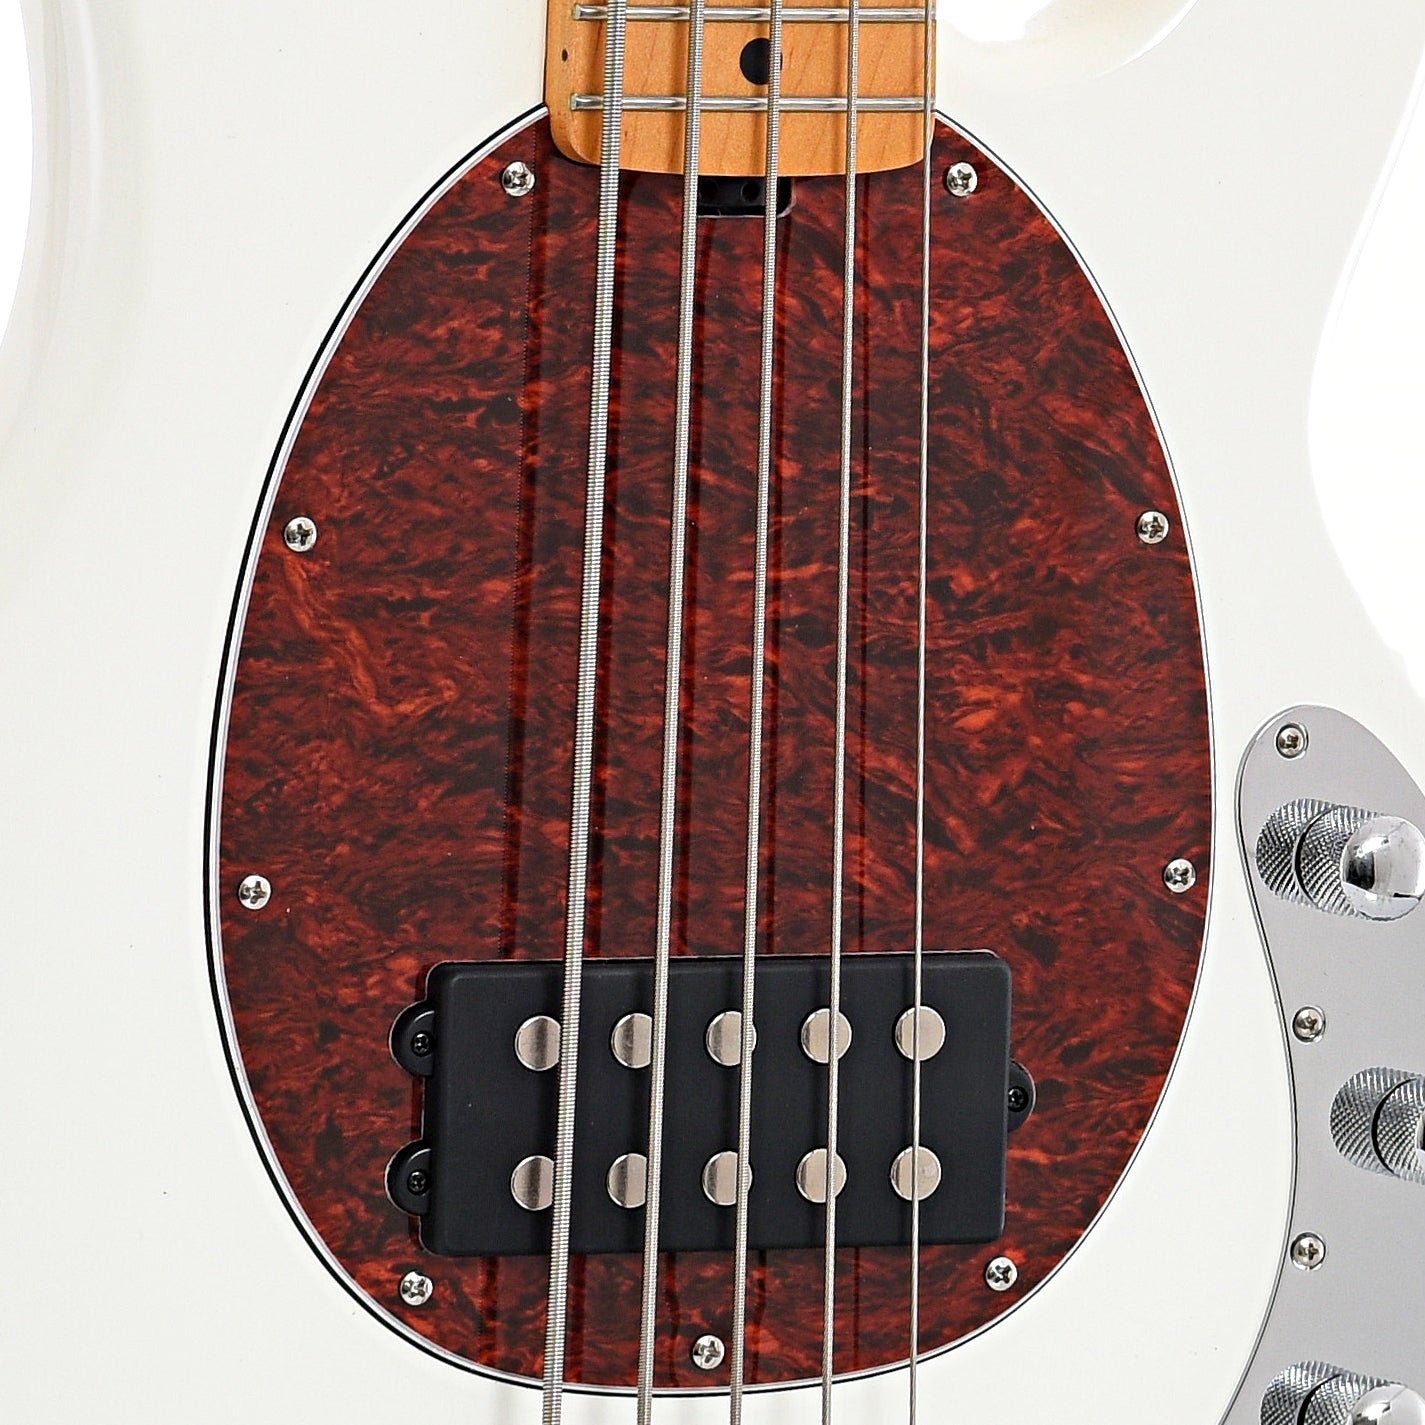 Sterling by Music Man RAY25CA 5-String Bass, Olympic White 